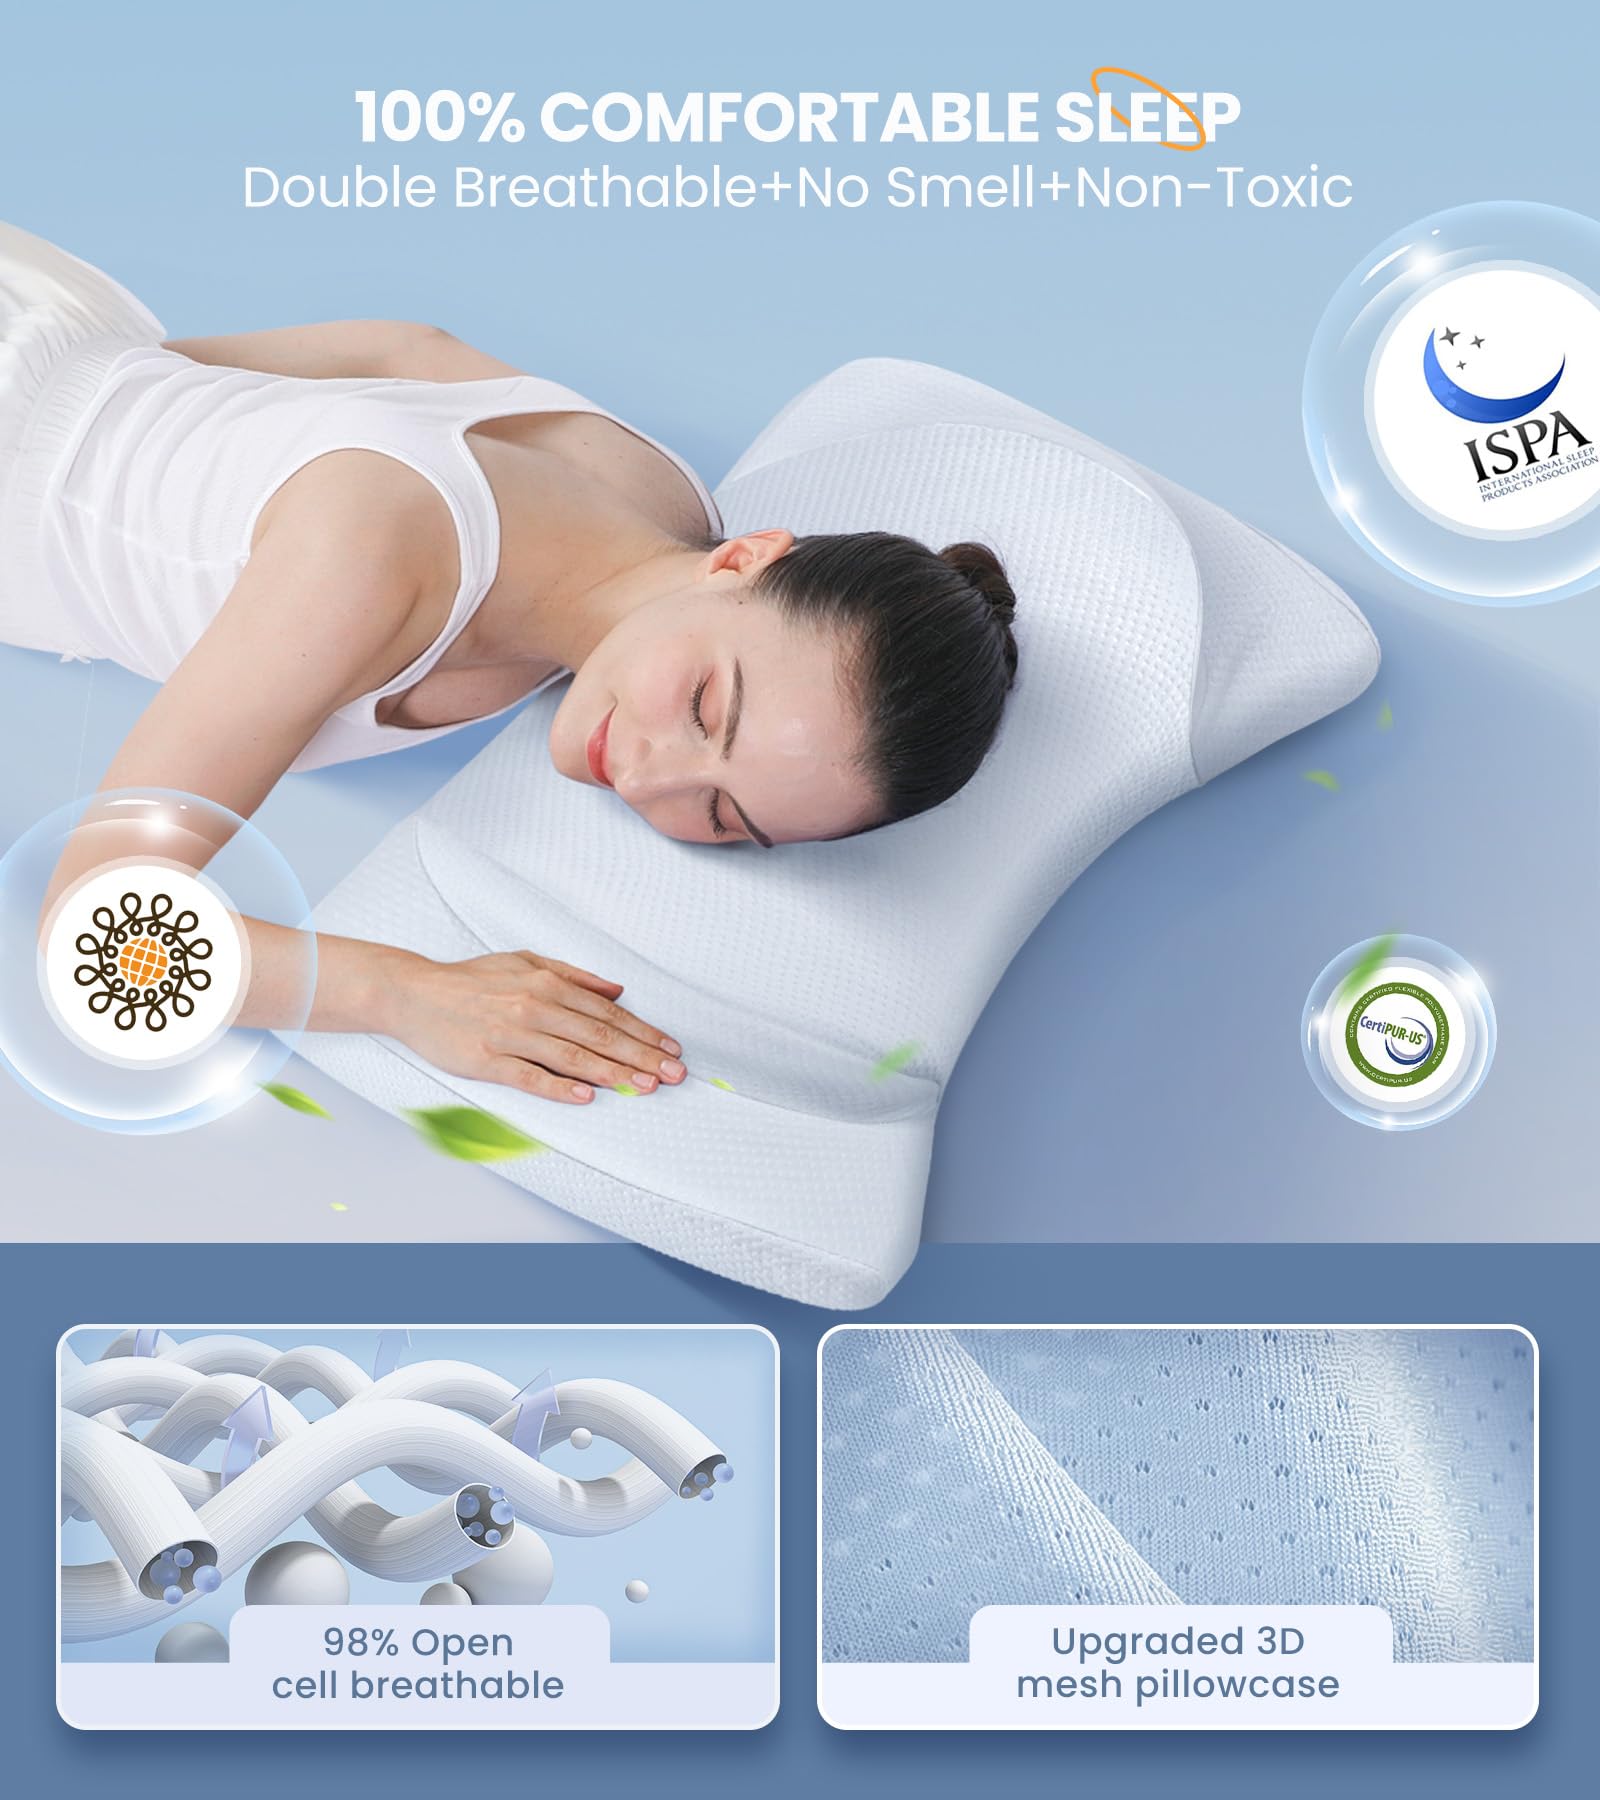 8X Support Side Sleeping Pillow for Neck Pain Relief, Adjustable Cervical Pillow Fit Shoulder Perfectly, Ergonomic Contour Memory Foam Pillows with Armrest Area, Bed Pillow for Back Stomach Sleeping